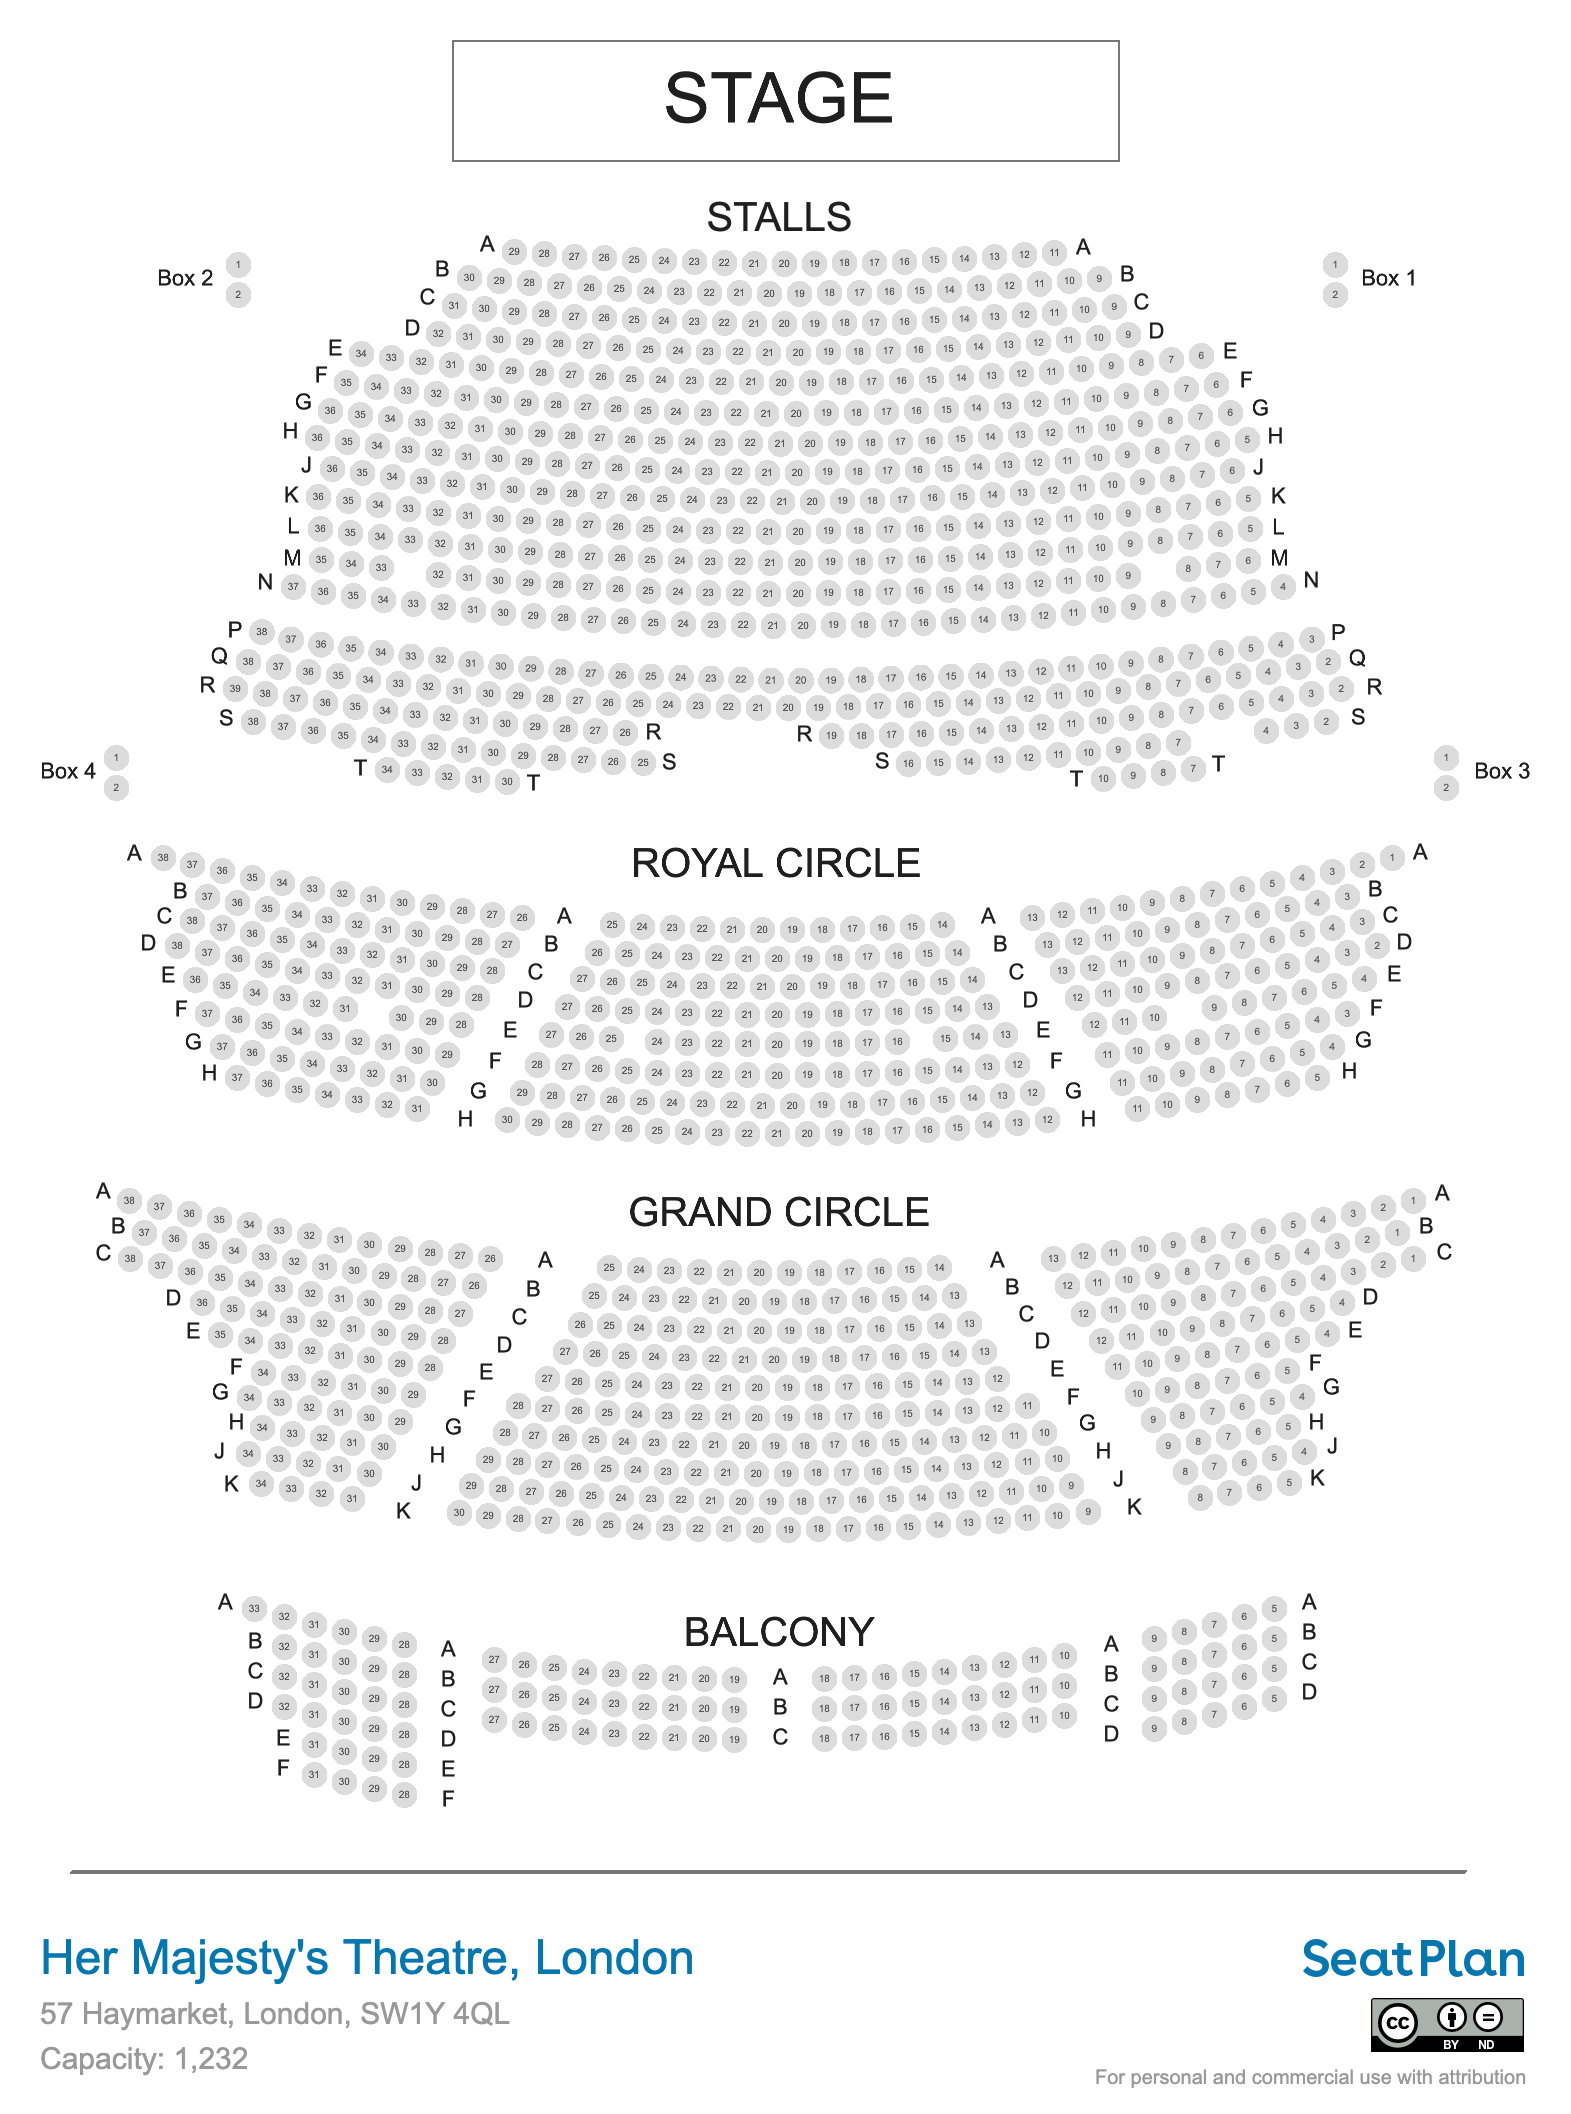 His Majesty's Theatre Seating Plan